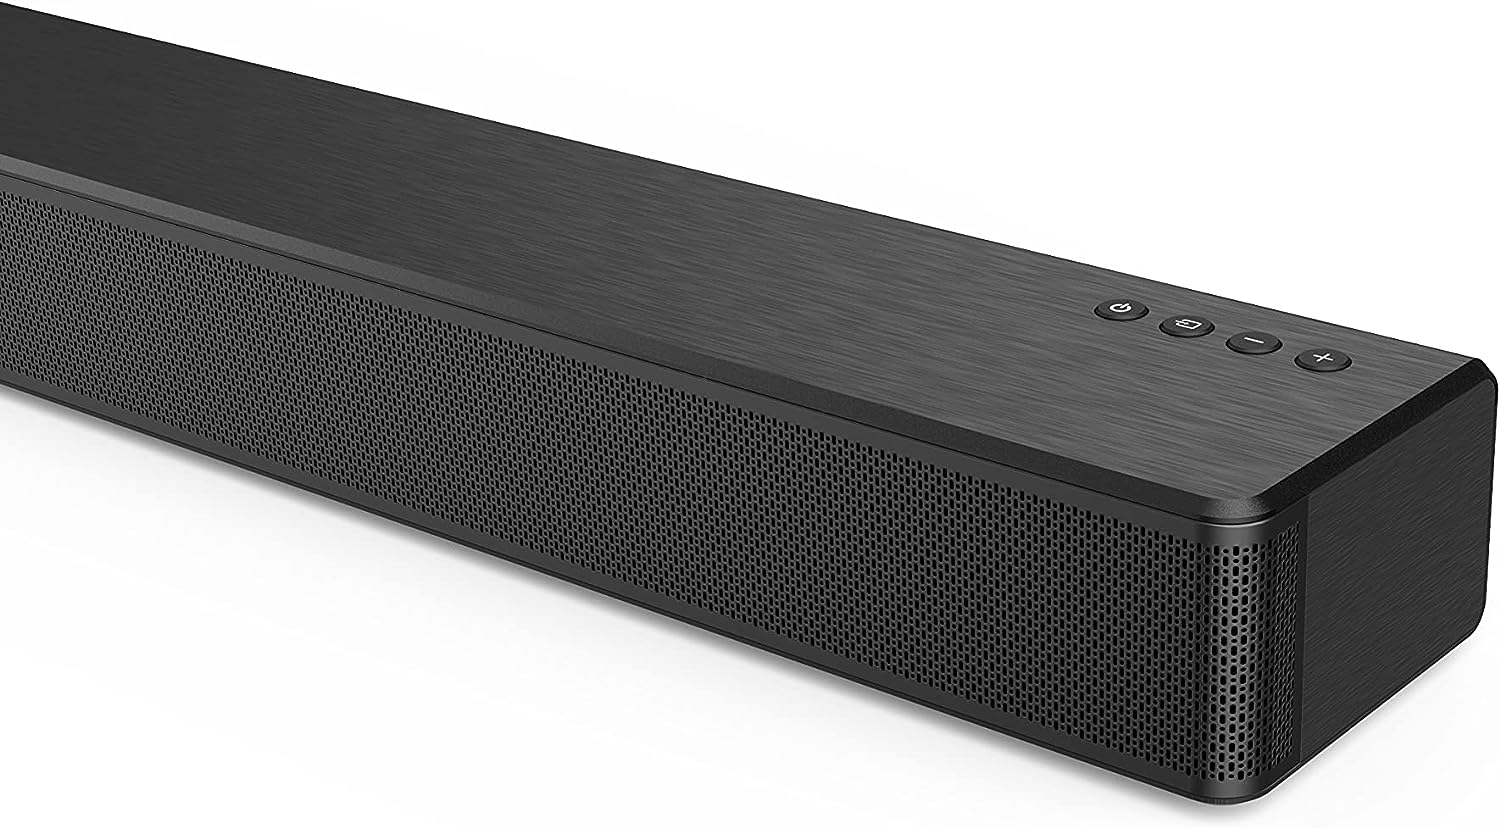 Hisense HS312 3.1ch Sound Bar with Wireless Subwoofer, 300W, Dolby Atmos, 4K Pass-Through, Cinematic Experience, One Remote contorl, Roku TV Ready, Bluetooth, HDMI